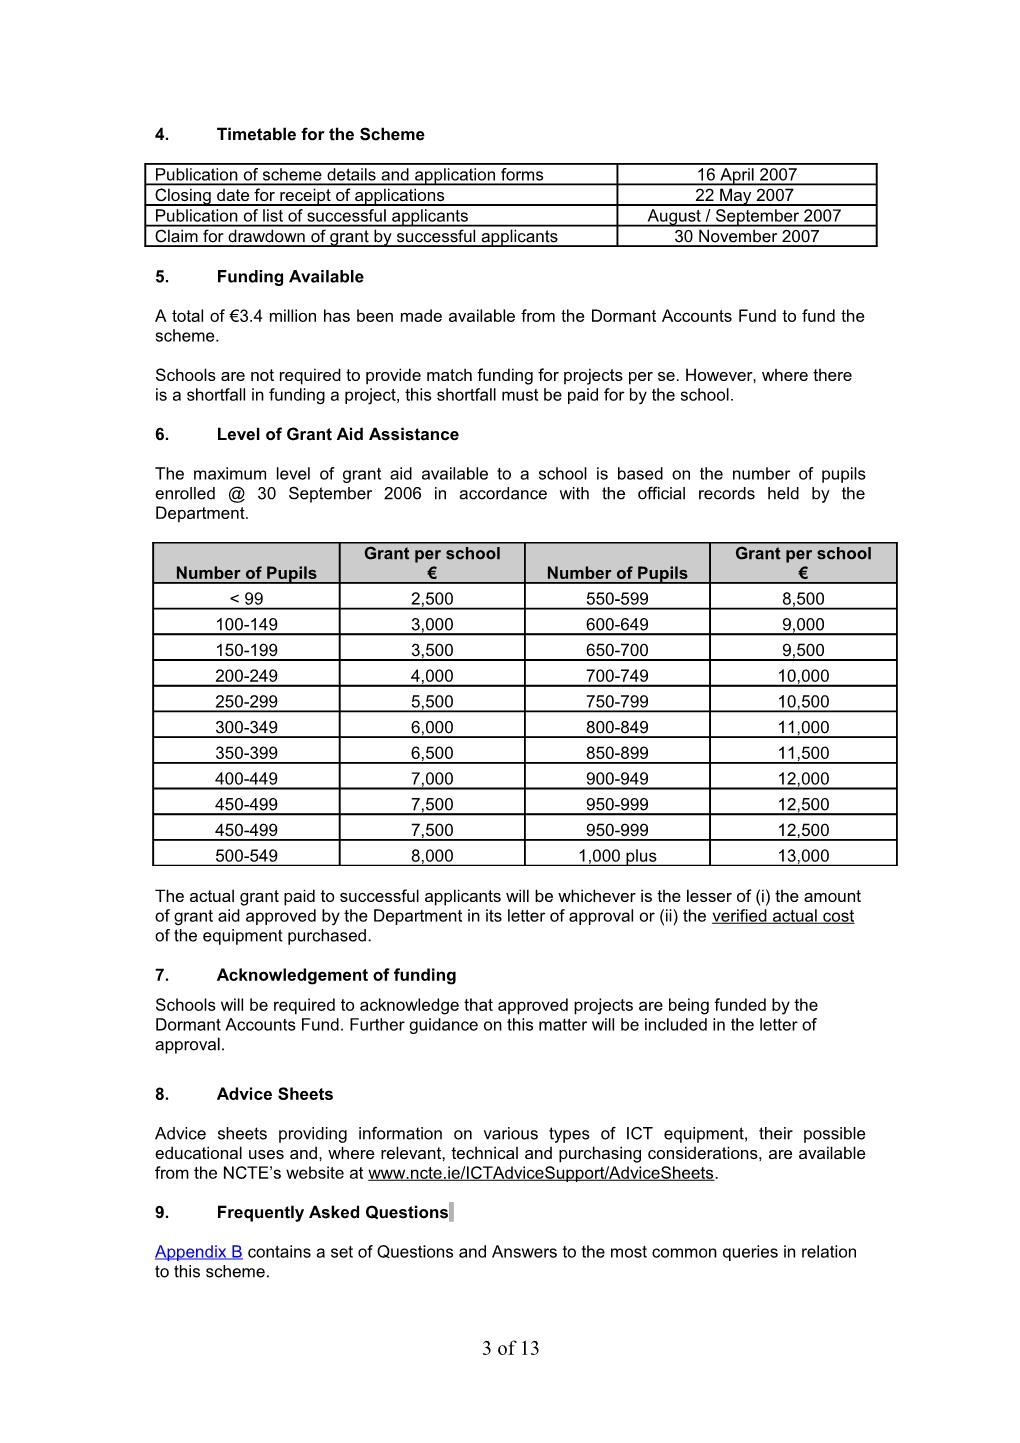 Application for Grant Aidunder Thedormant Accounts (Educational Disadvantage) Fund